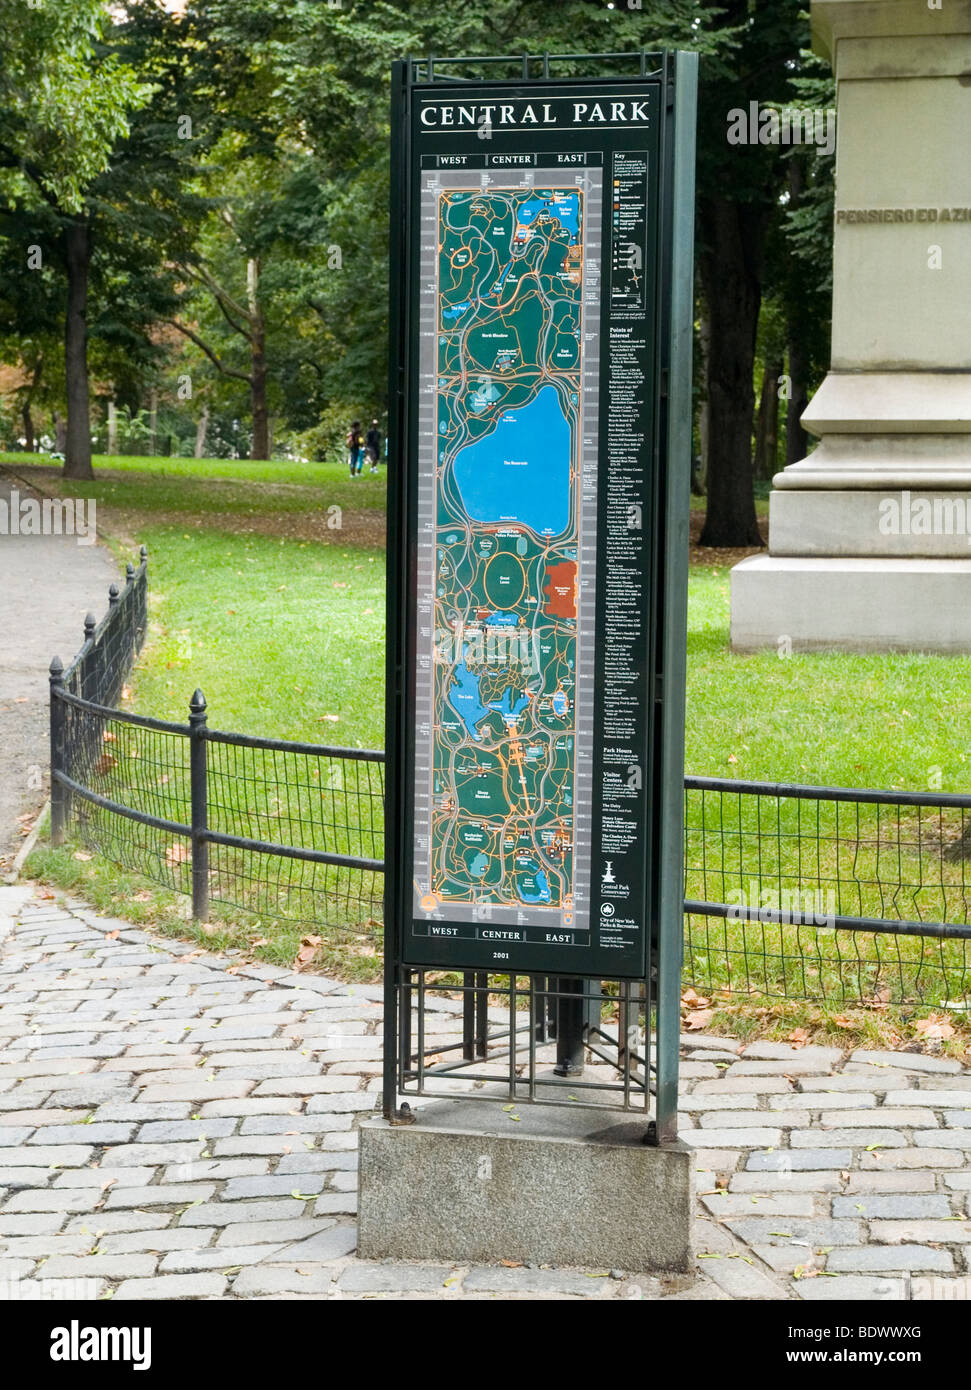 A map and information panel in Central Park, New York City USA Stock Photo